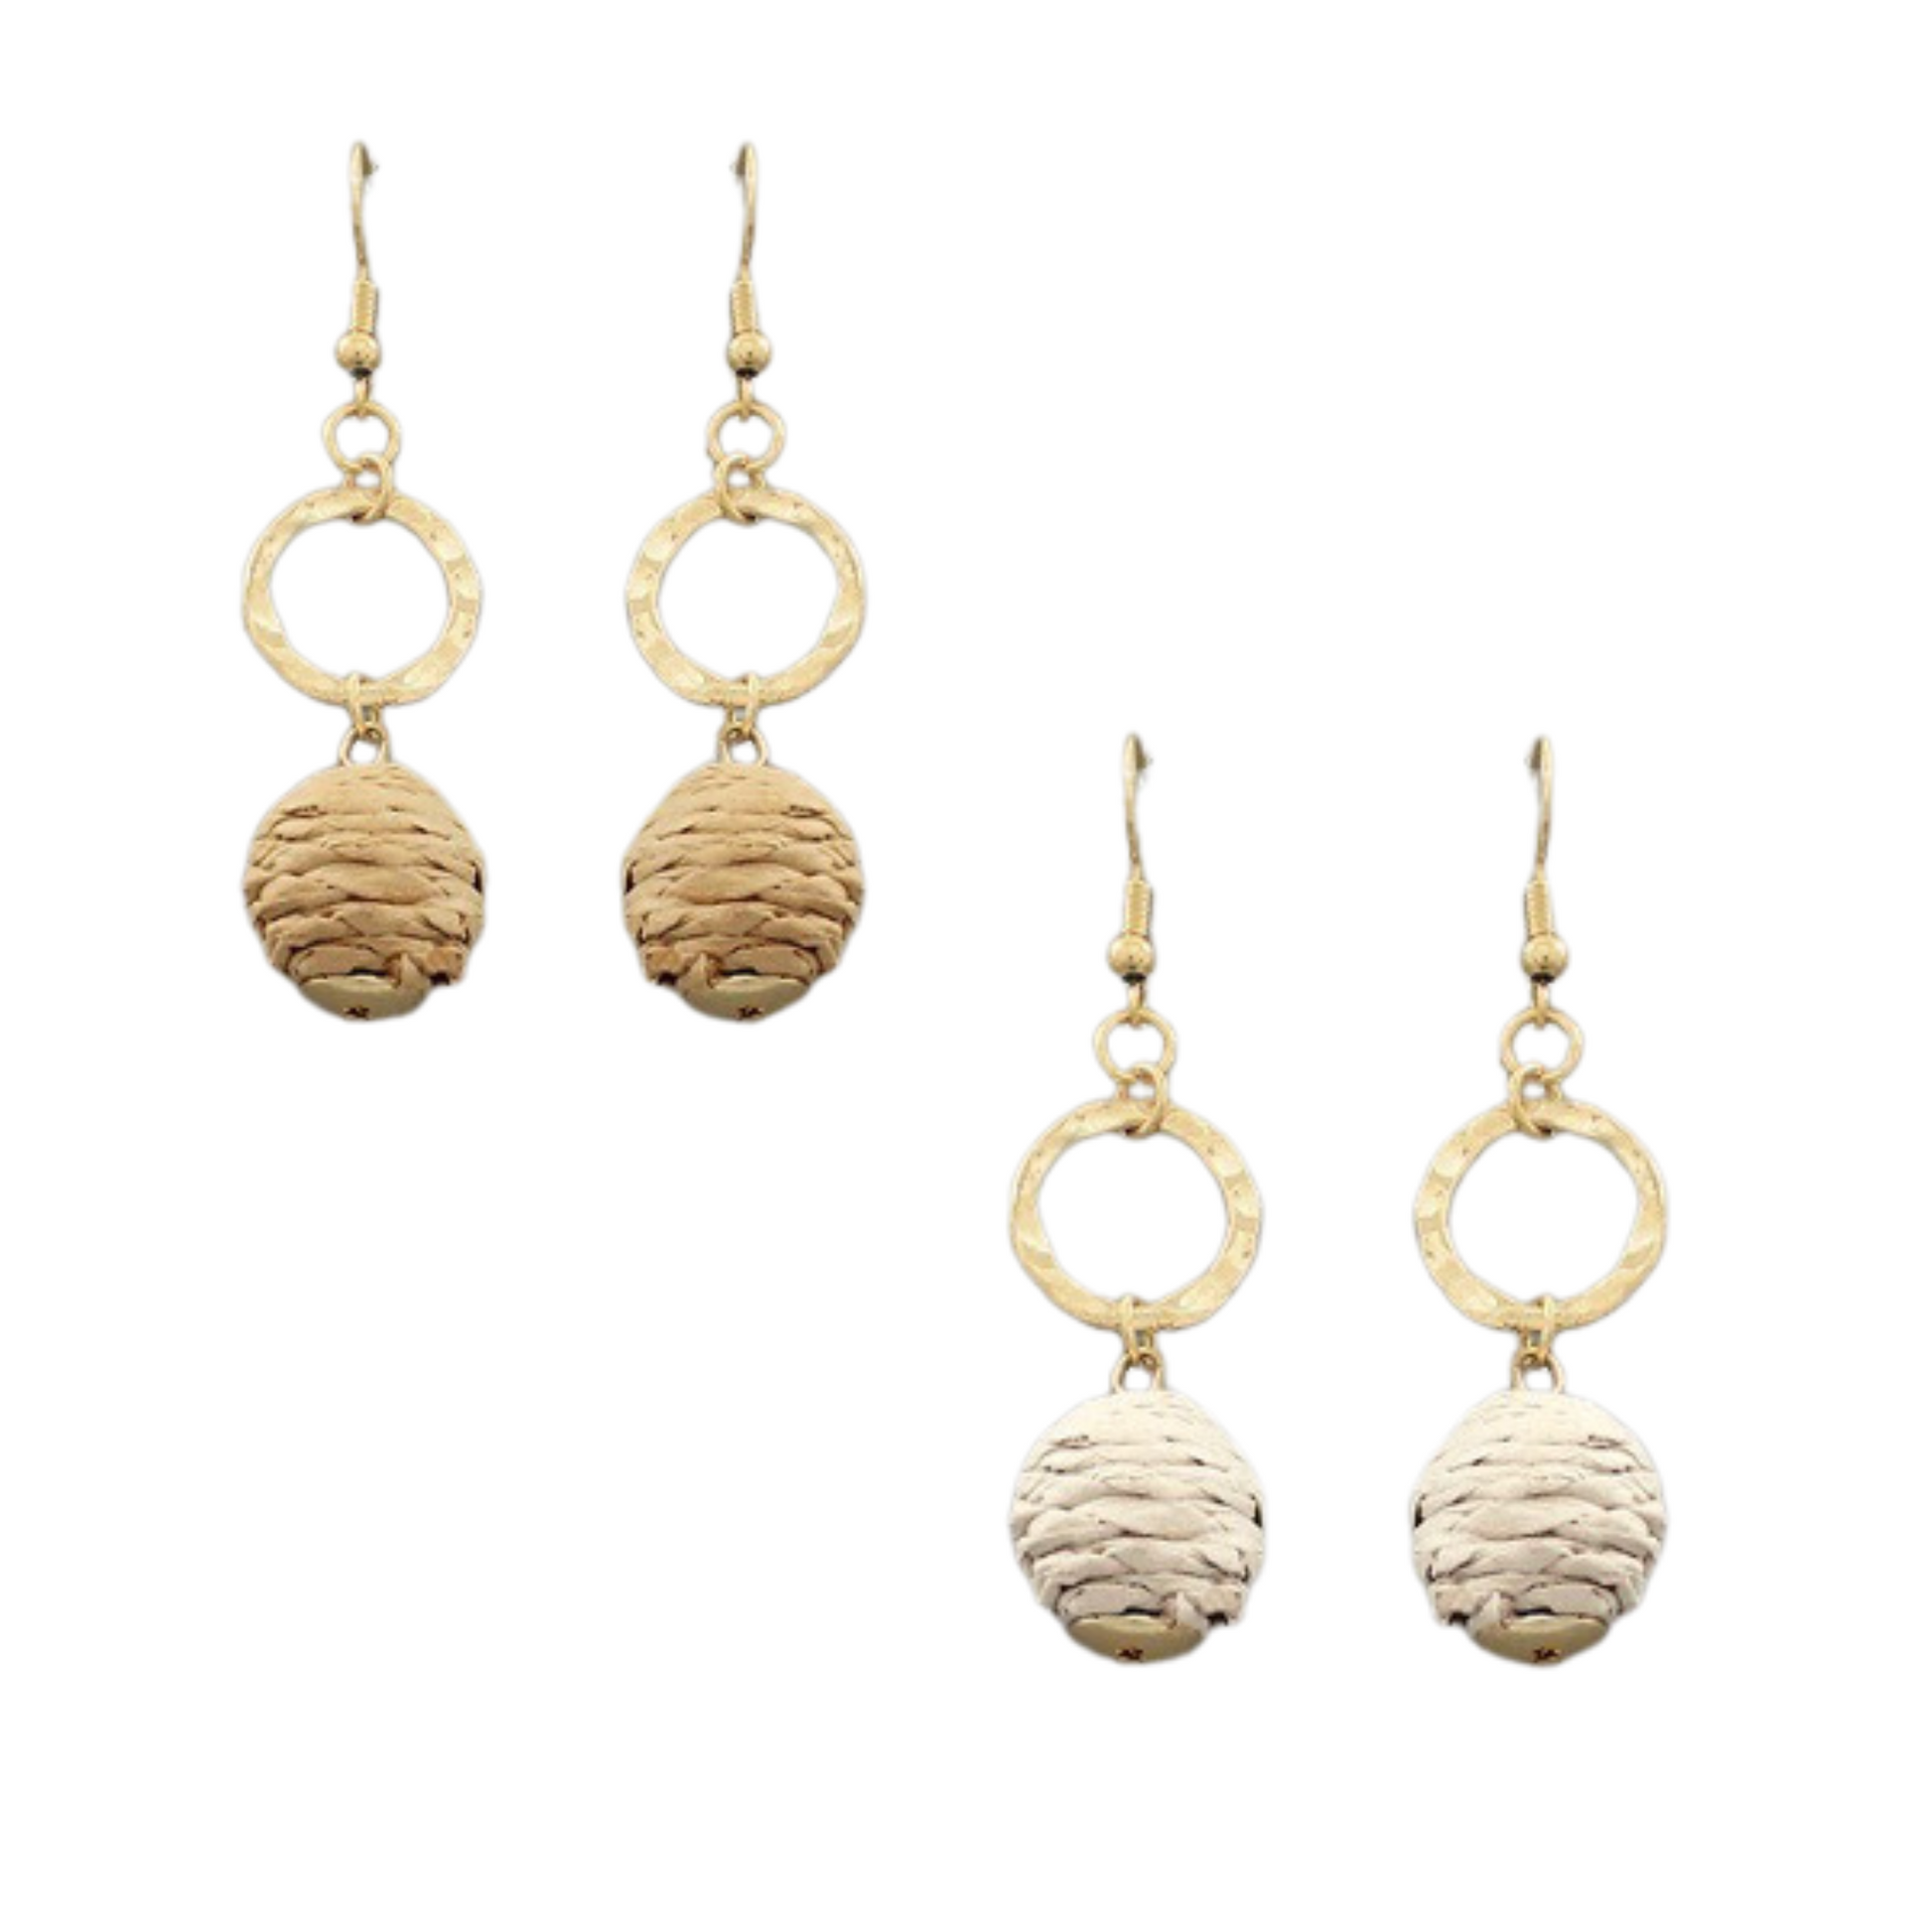 woven ball dangle earrings with a gold circle accent. Available in taupe and beige